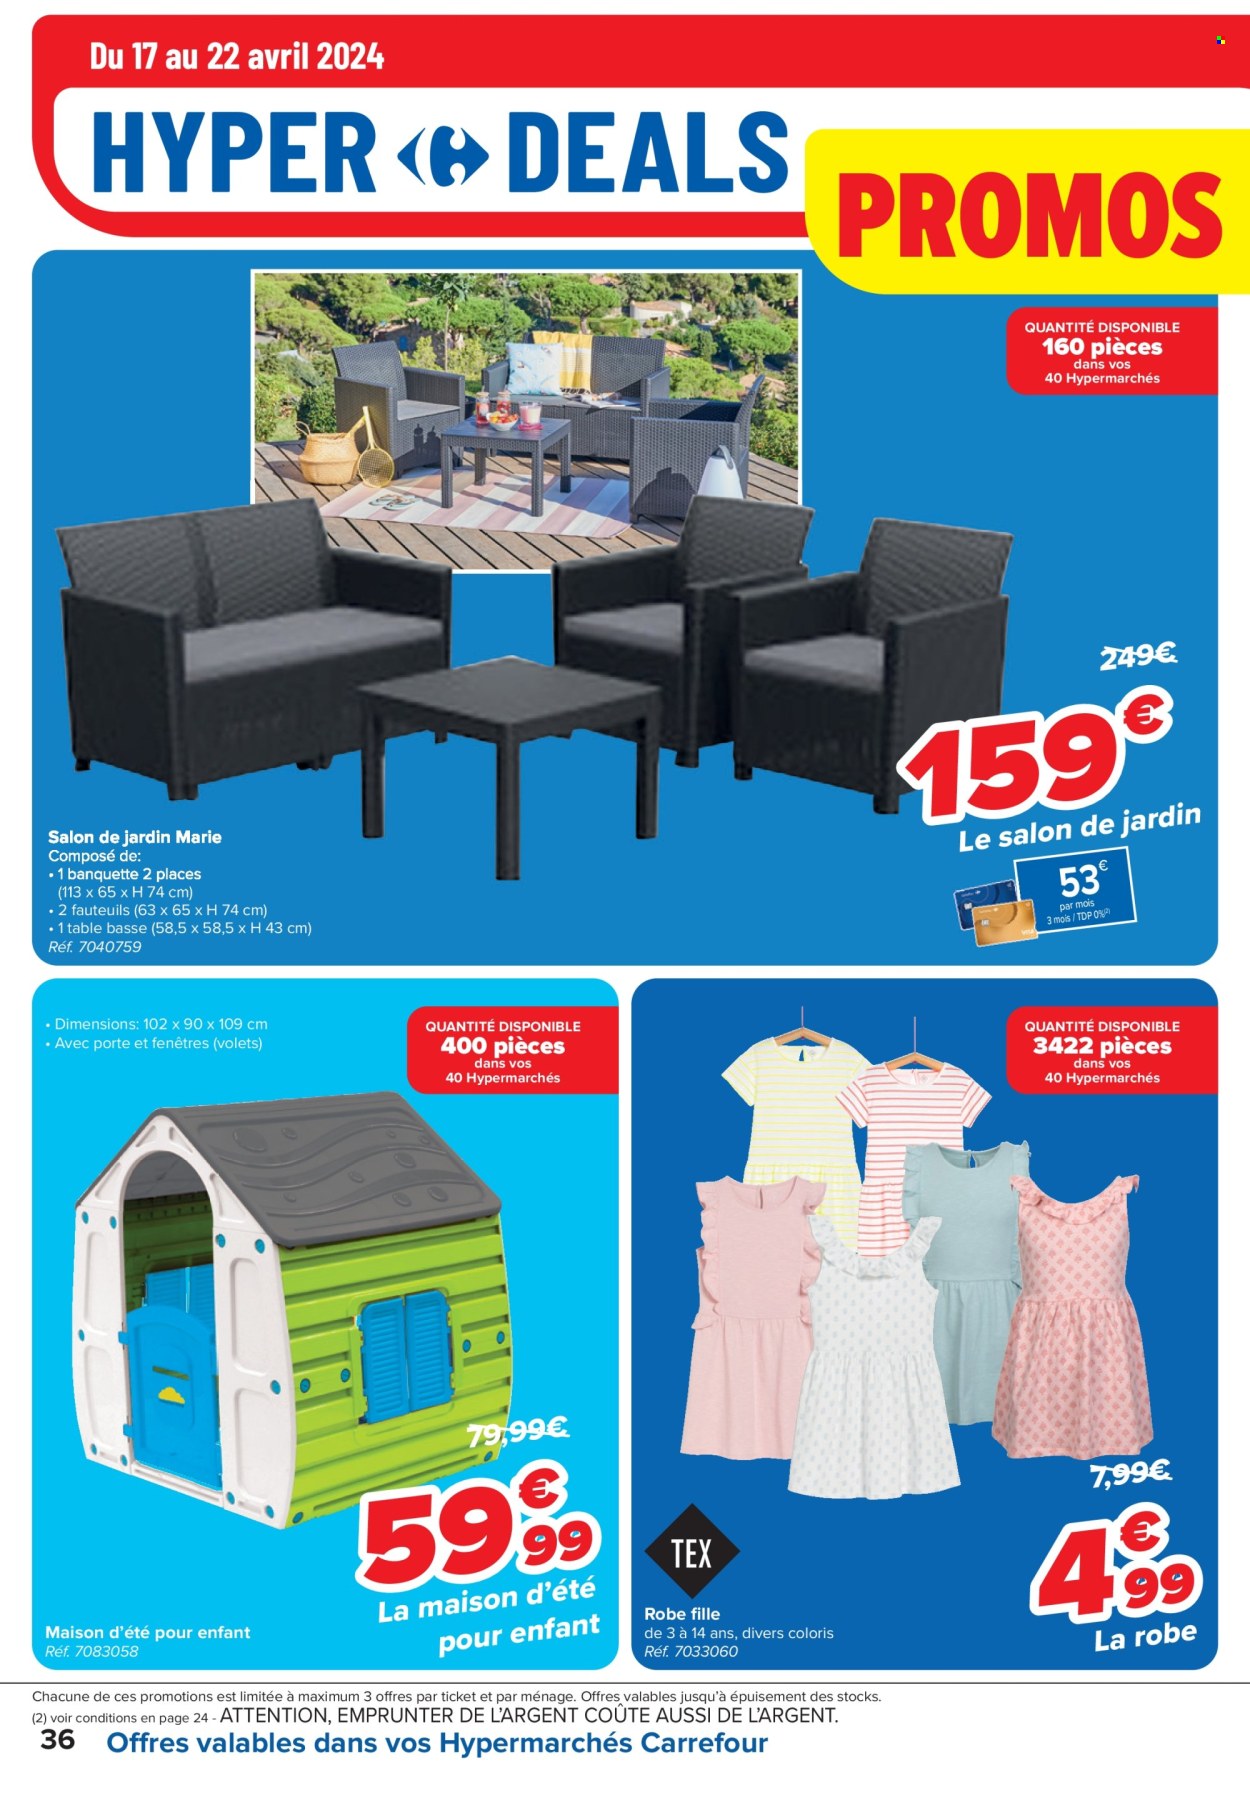 Catalogue Carrefour hypermarkt - 17.4.2024 - 29.4.2024. Page 36.